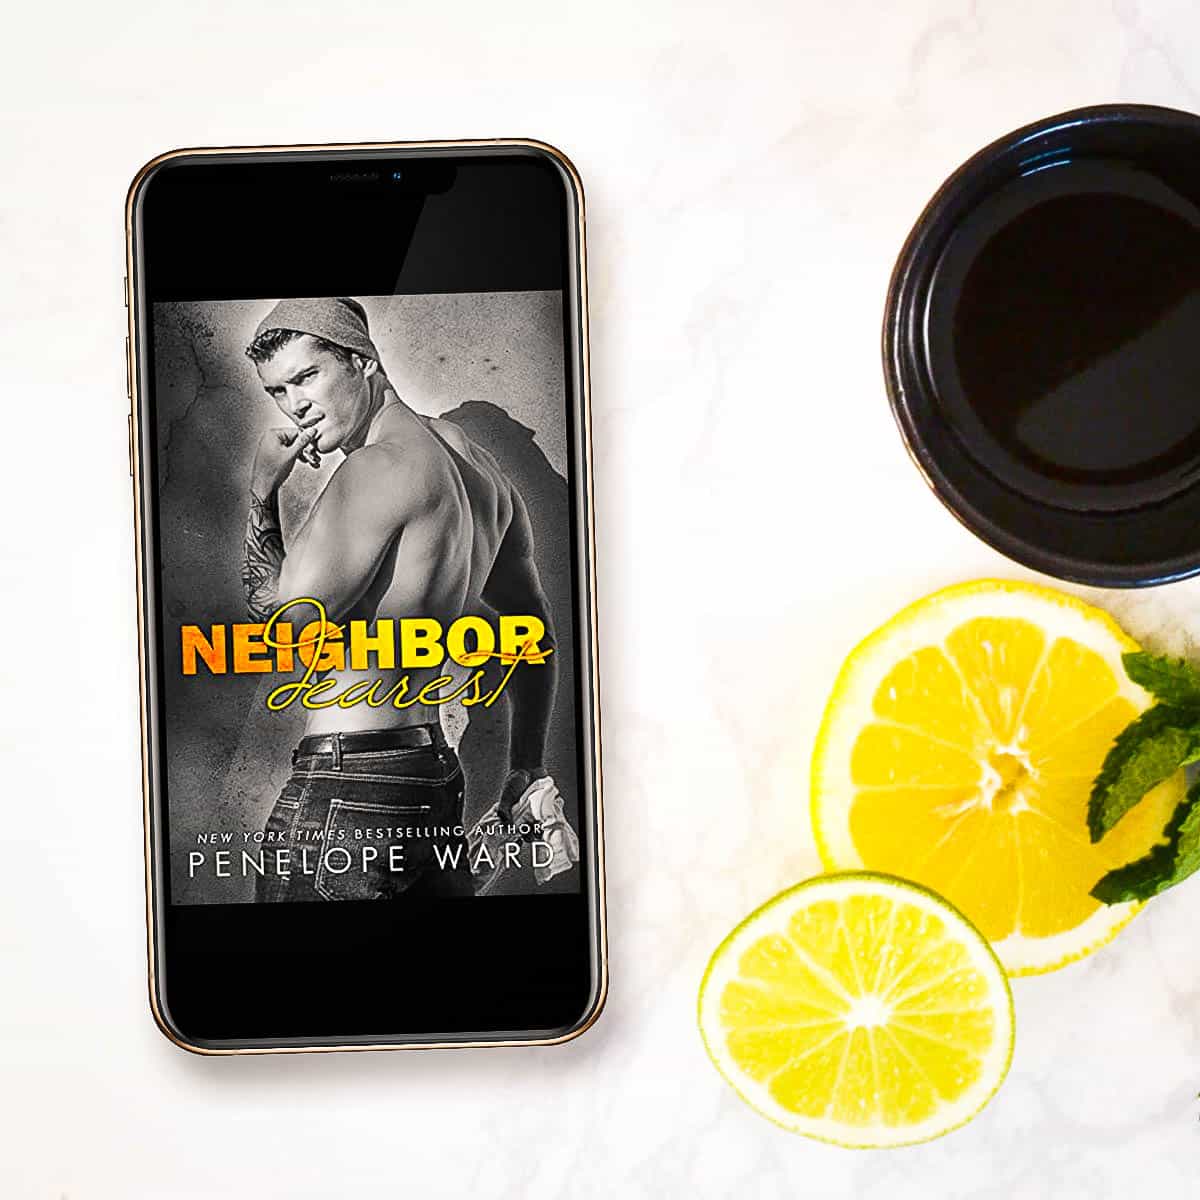 Neighbor Dearest by Penelope Ward, a continuation(ish) of Stepbrother Dearest, is an angsty enemies-to-lovers contemporary romance with a surprise twist and an emotional resolution.